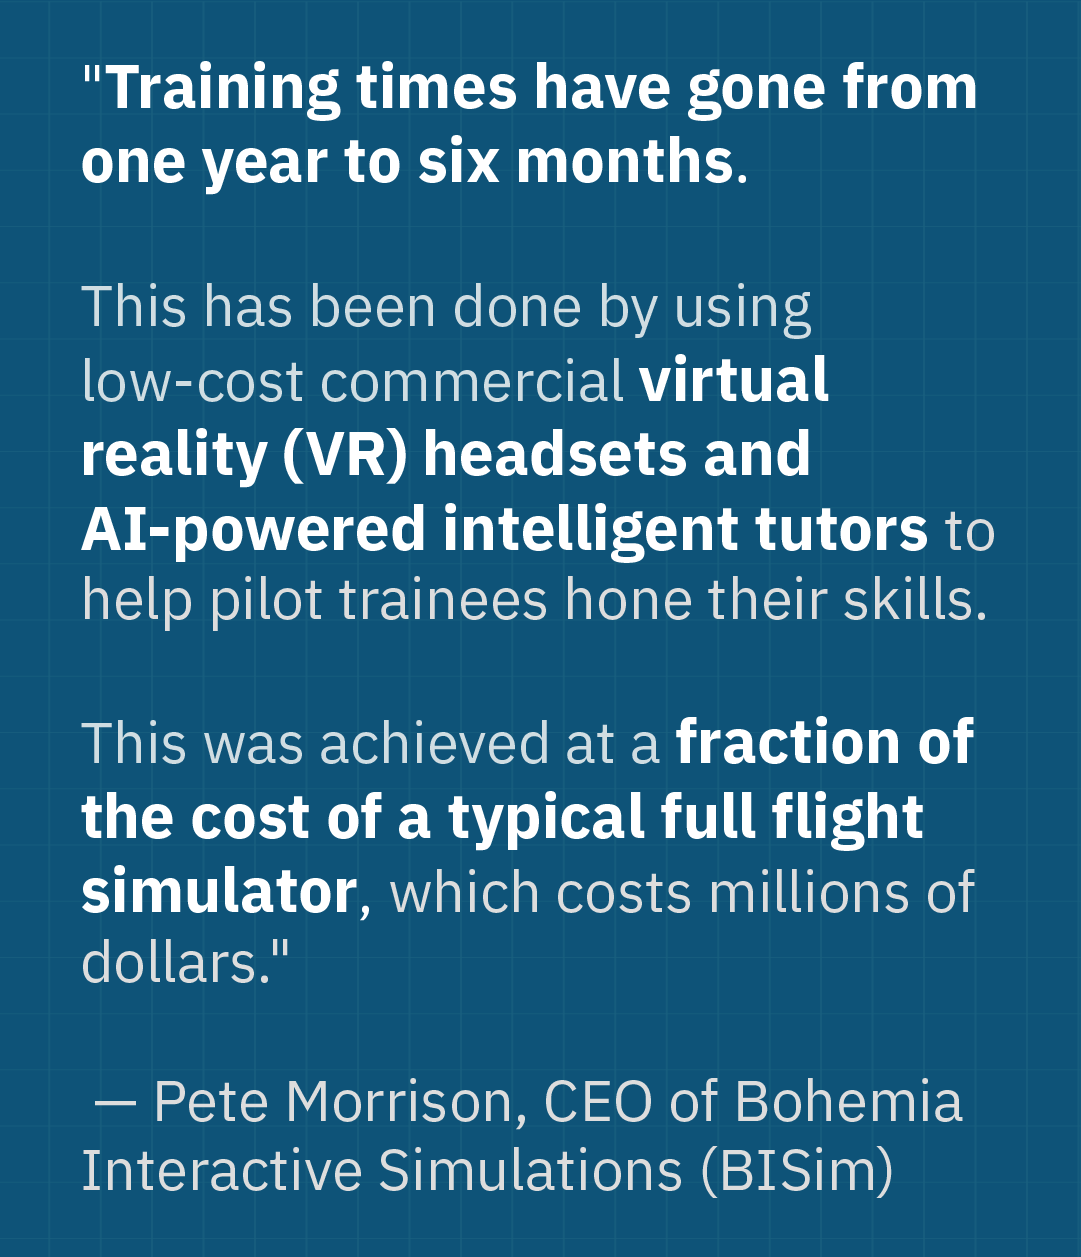 According to Pete Morrison, CEO of Bohemia Interactive Simulations (BISim), "Training times have gone from one year to six months. . . . This was achieved at a fraction of the cost of a typical full flight simulator, which costs millions of dollars."